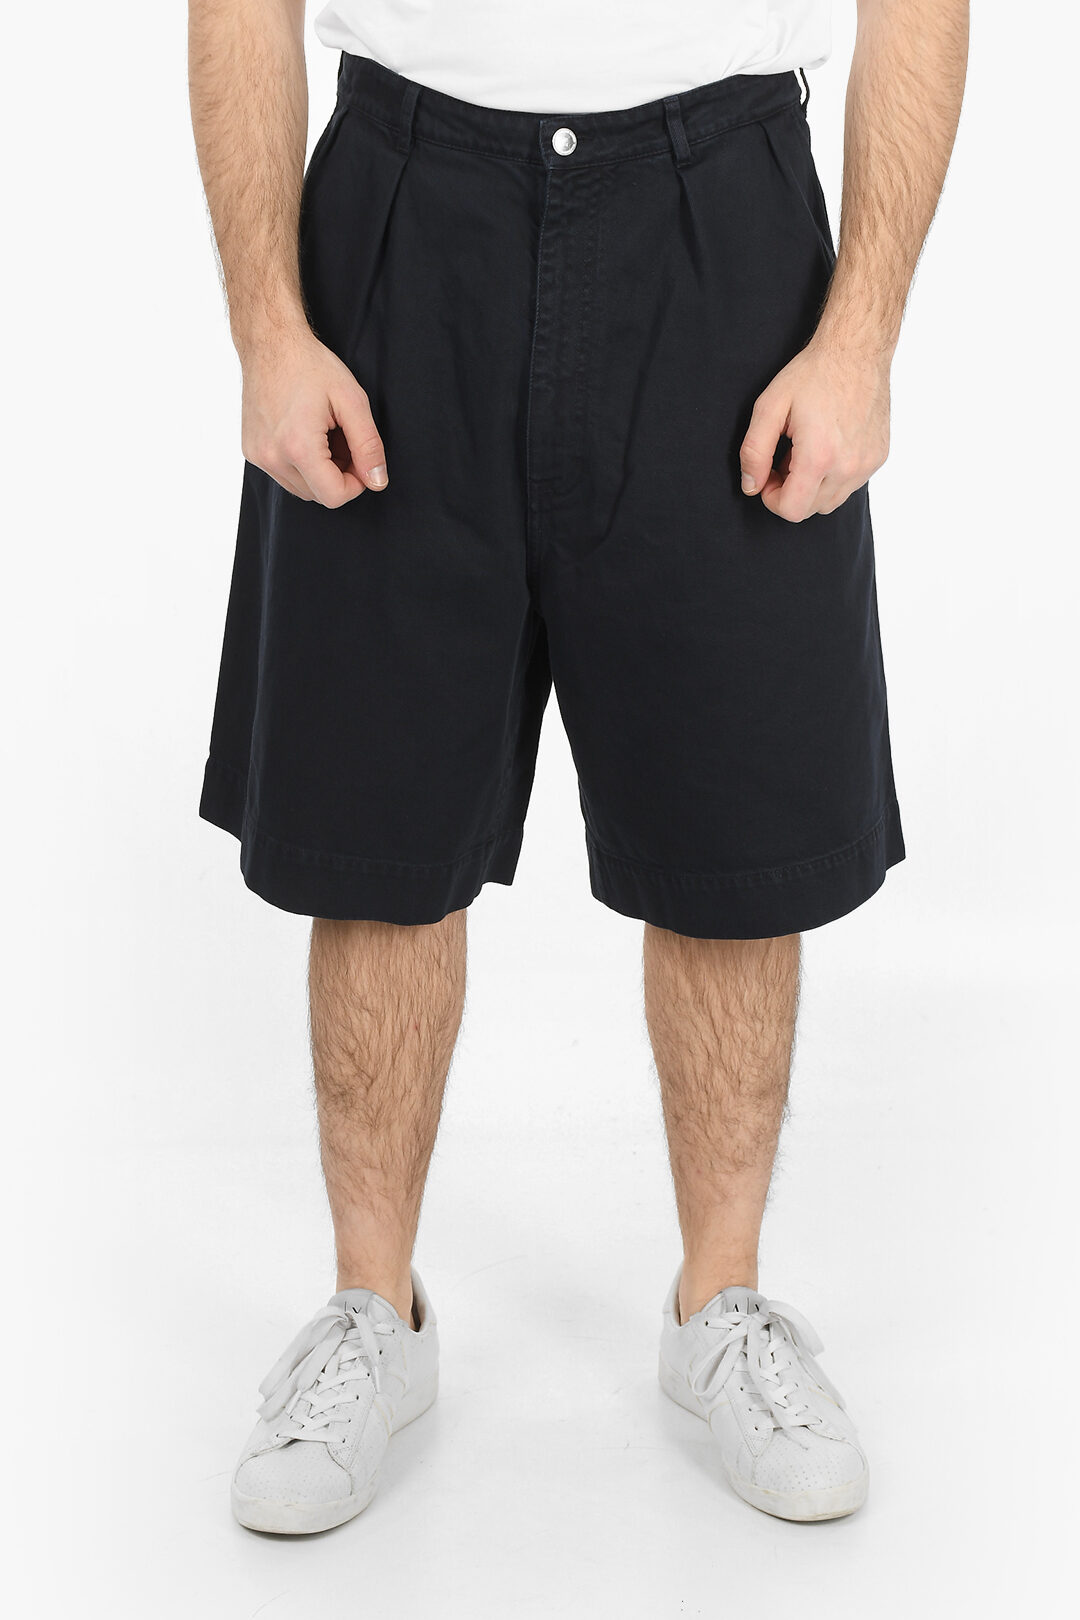 Raf Simons Wide Fit Double Pleated Denim Shorts men - Glamood Outlet